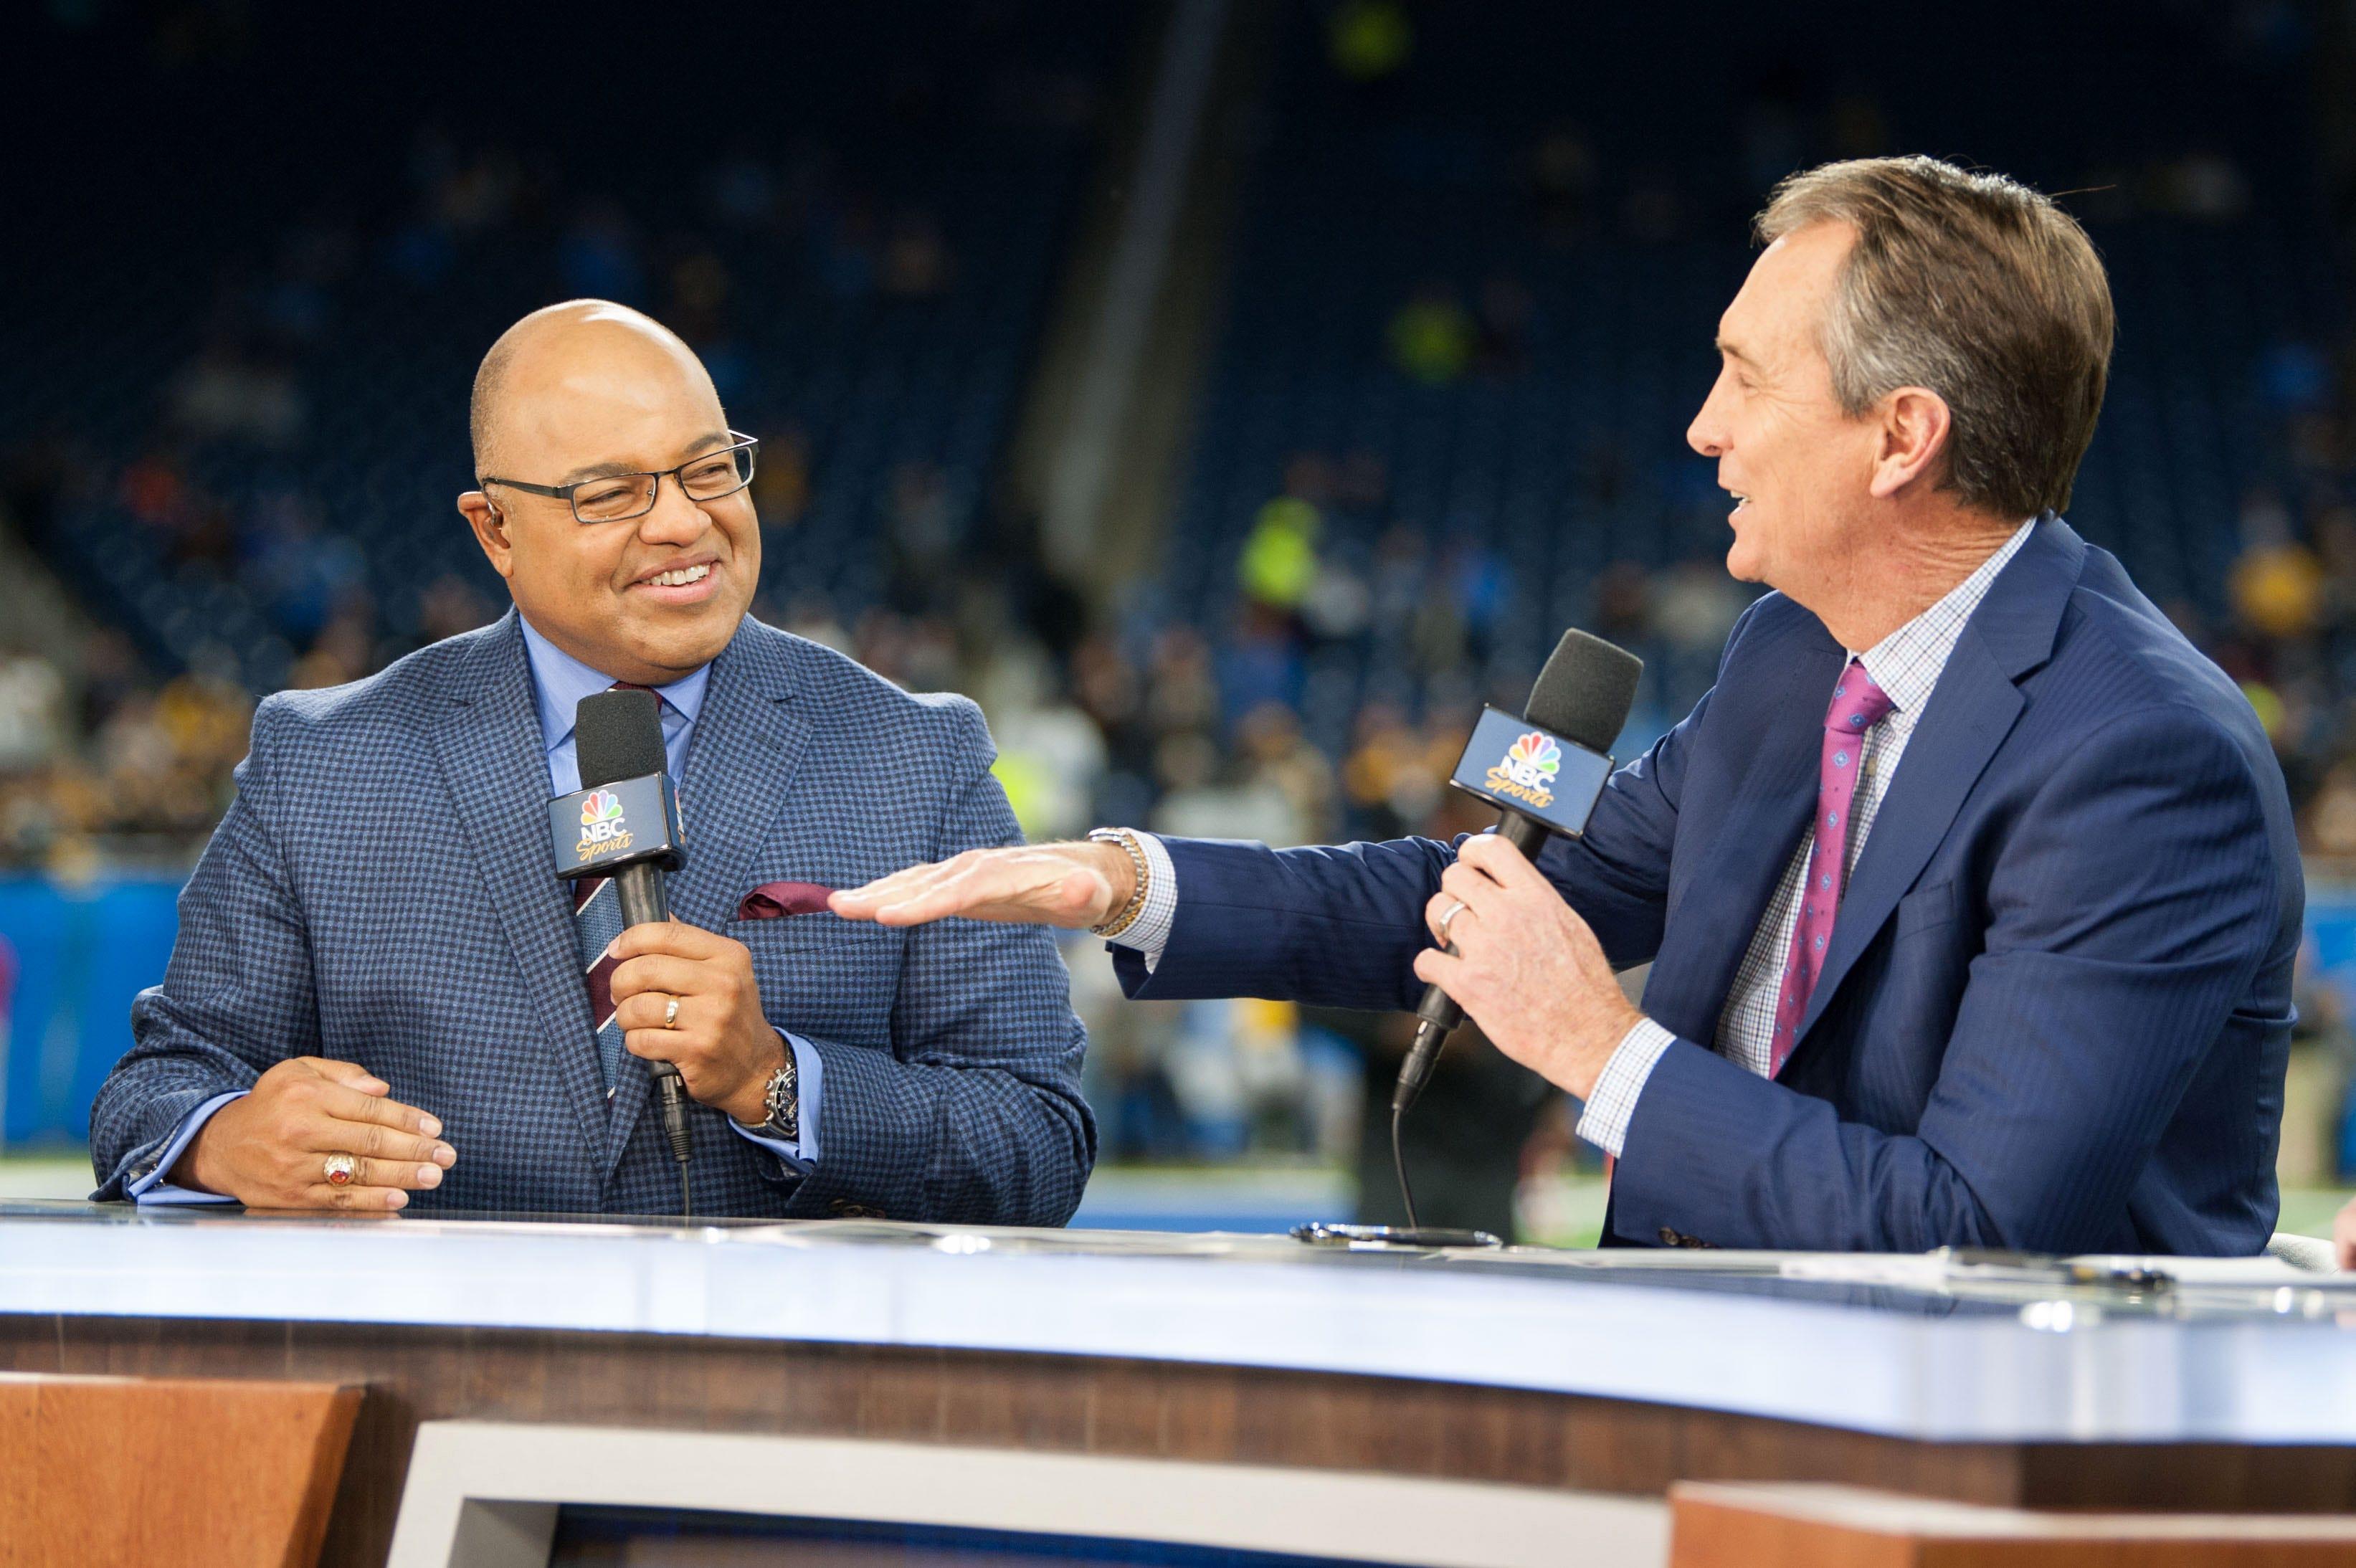 NBC Sports broadcasters Mike Tirico and Cris Collinsworth are the announcers for the Sunday Night Football game between the Green Bay Packers and Minnesota Vikings in NFL Week 17.